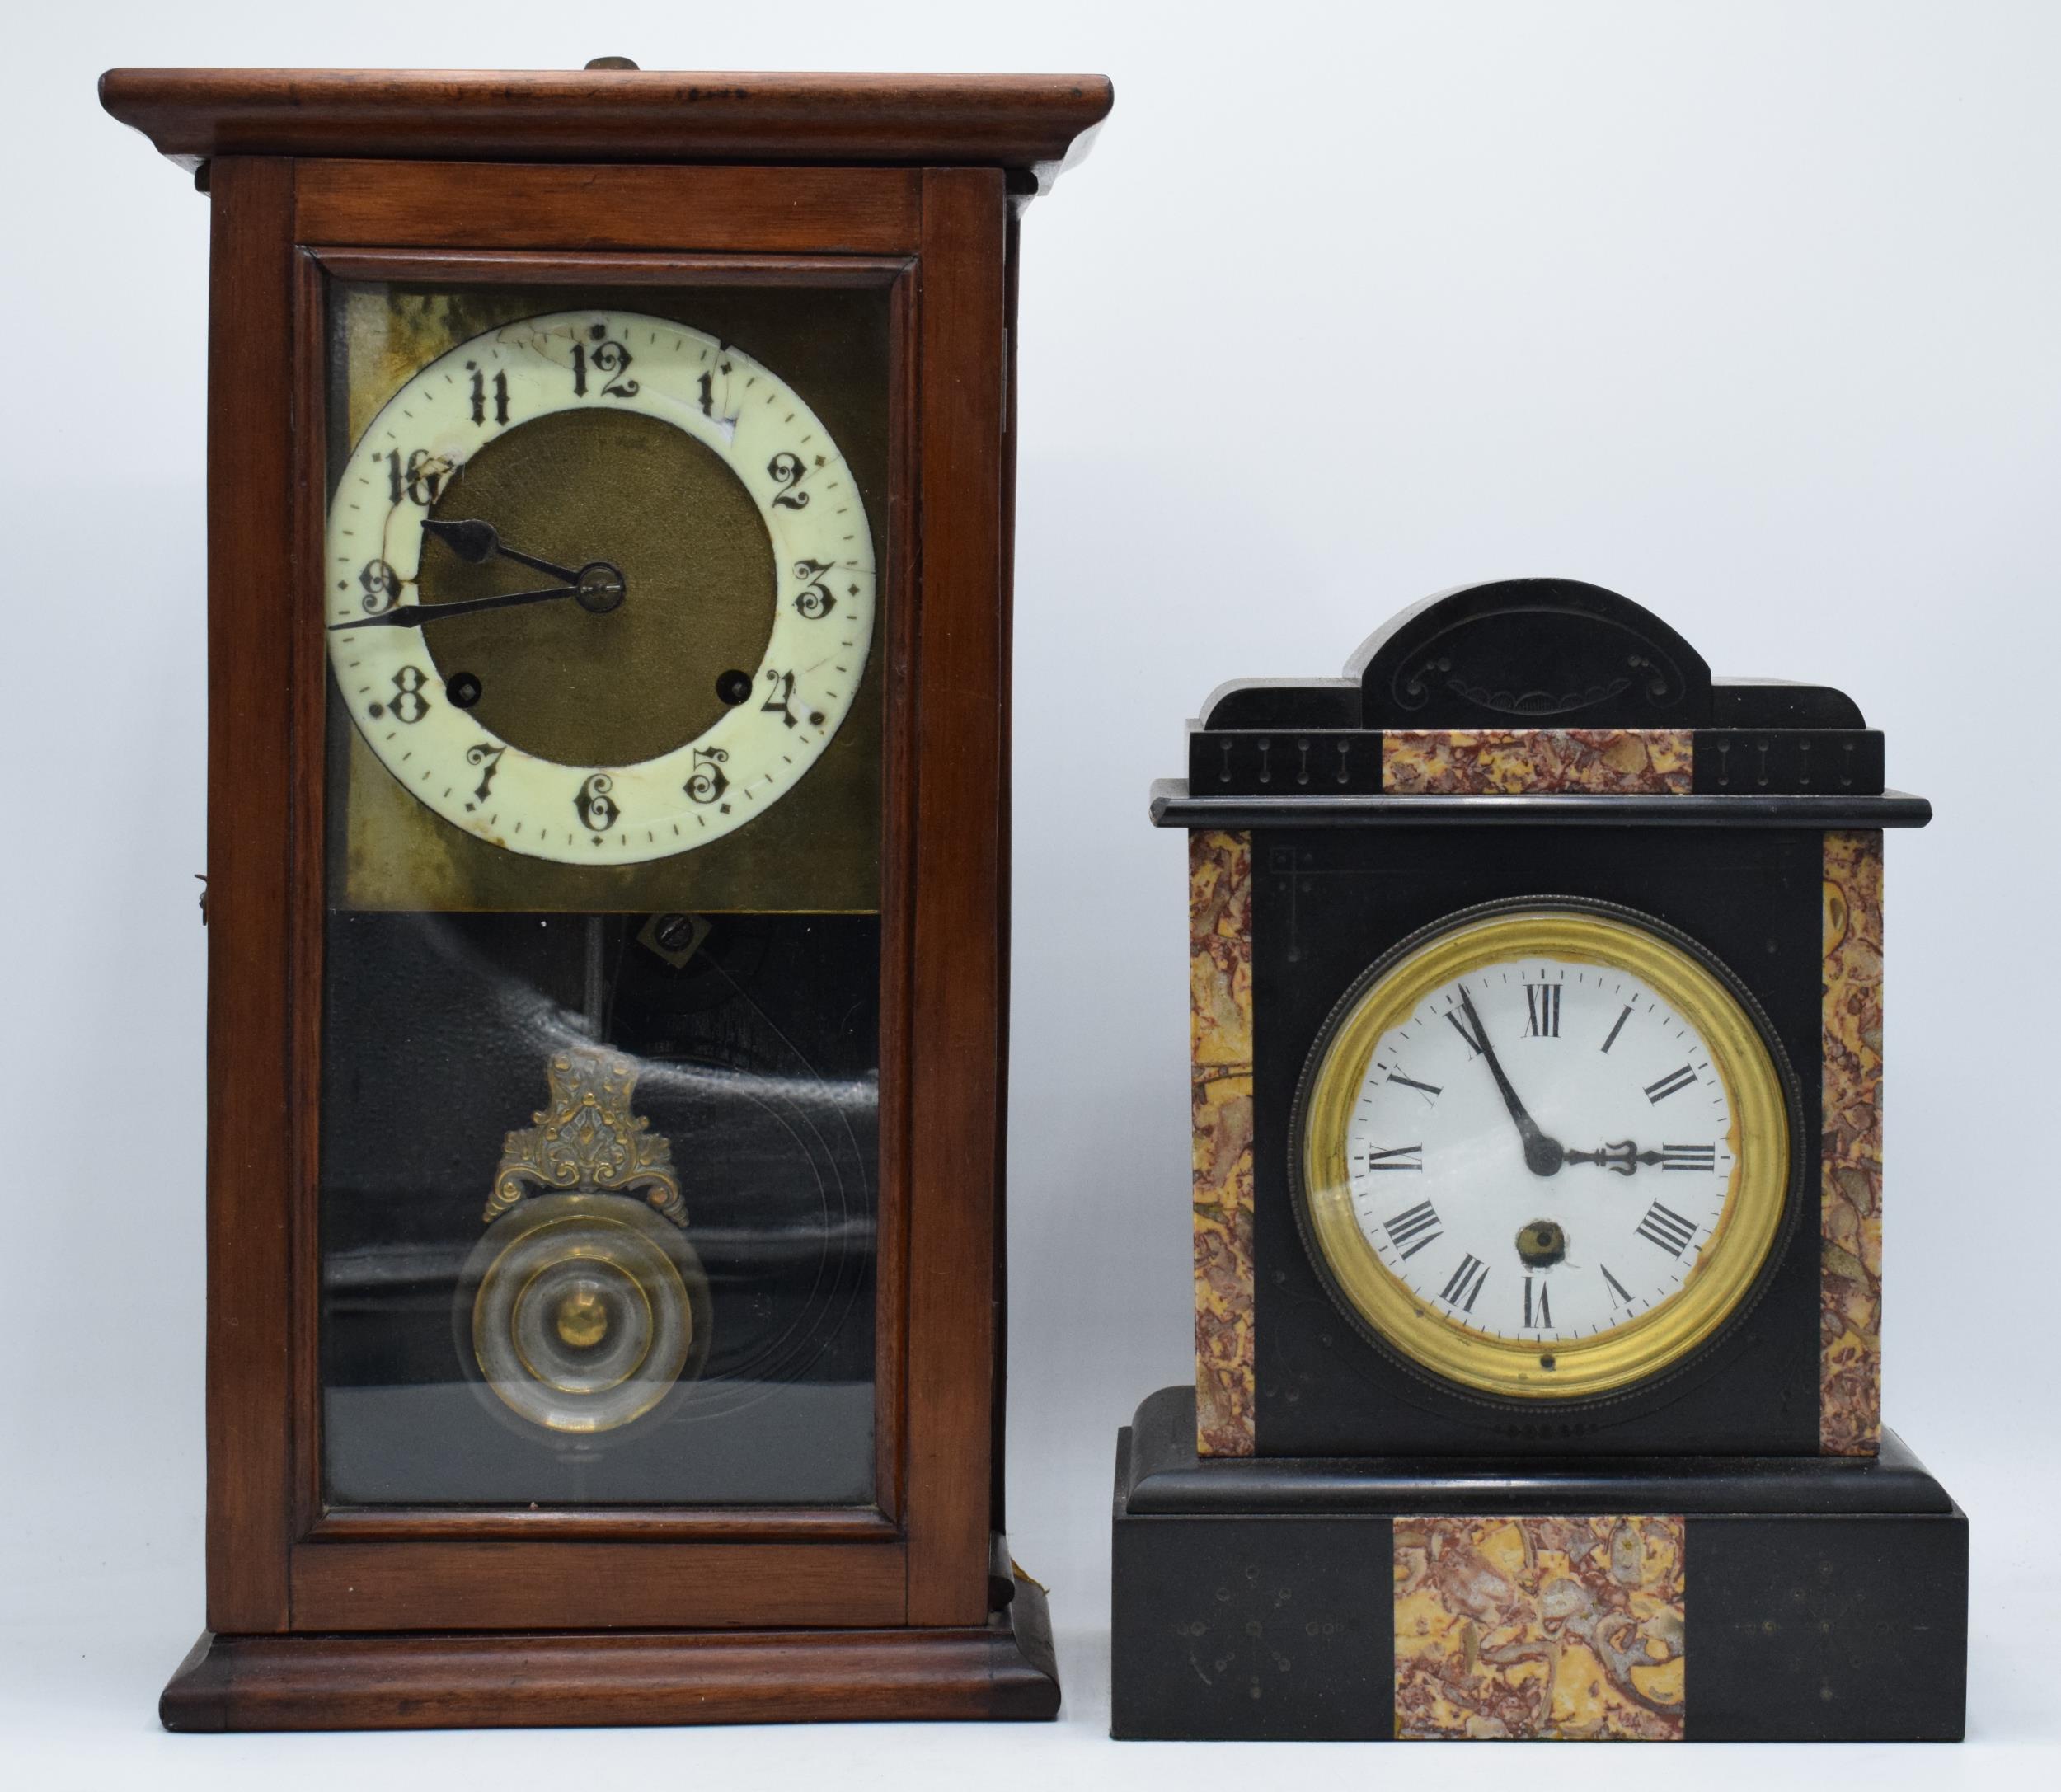 A vintage American wooden cased wall clock together with an early 20th century slate mantle clock (